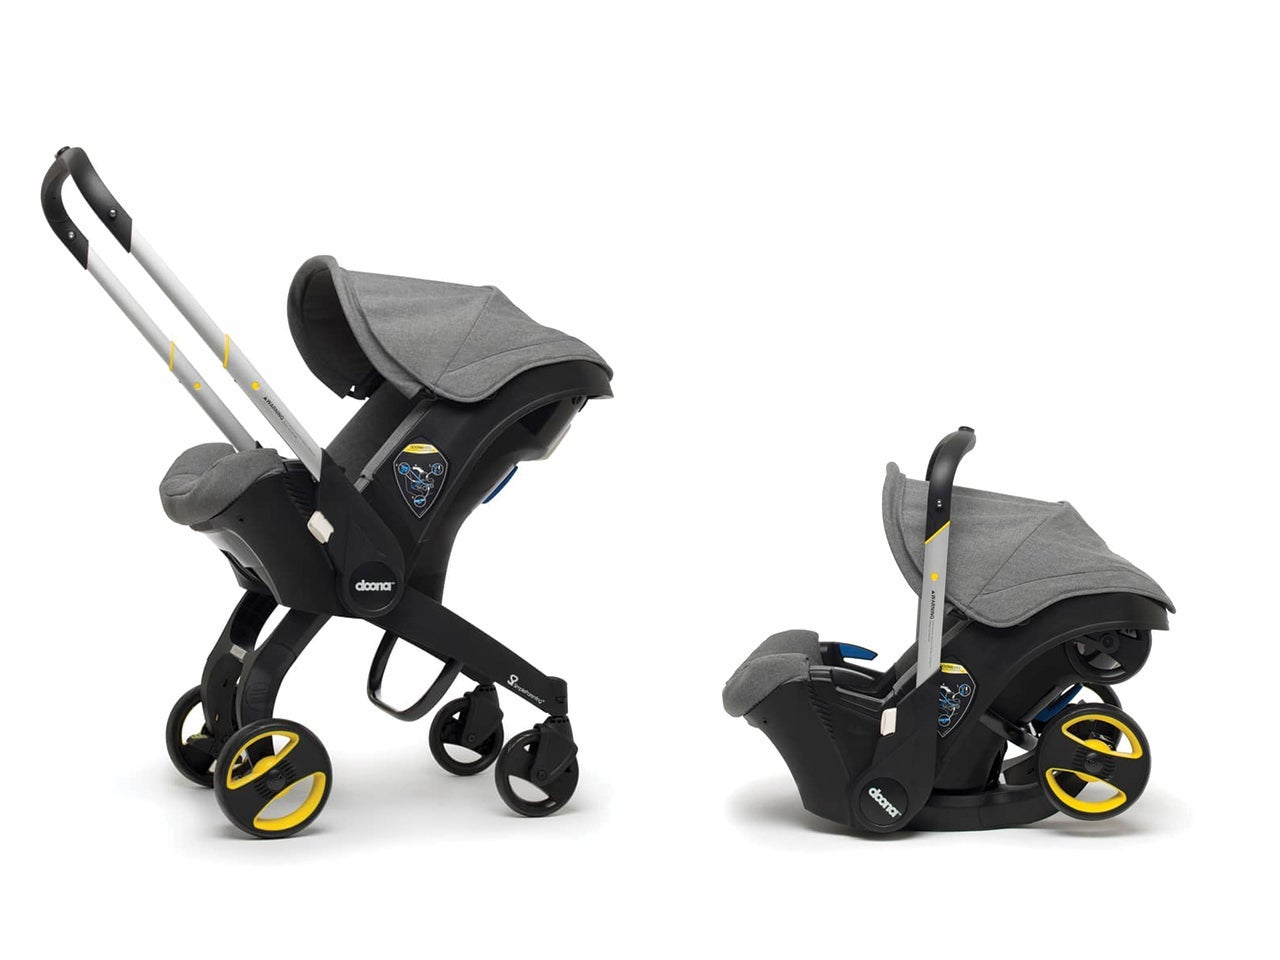 The 10 best travel strollers for your next trip - The Points Guy